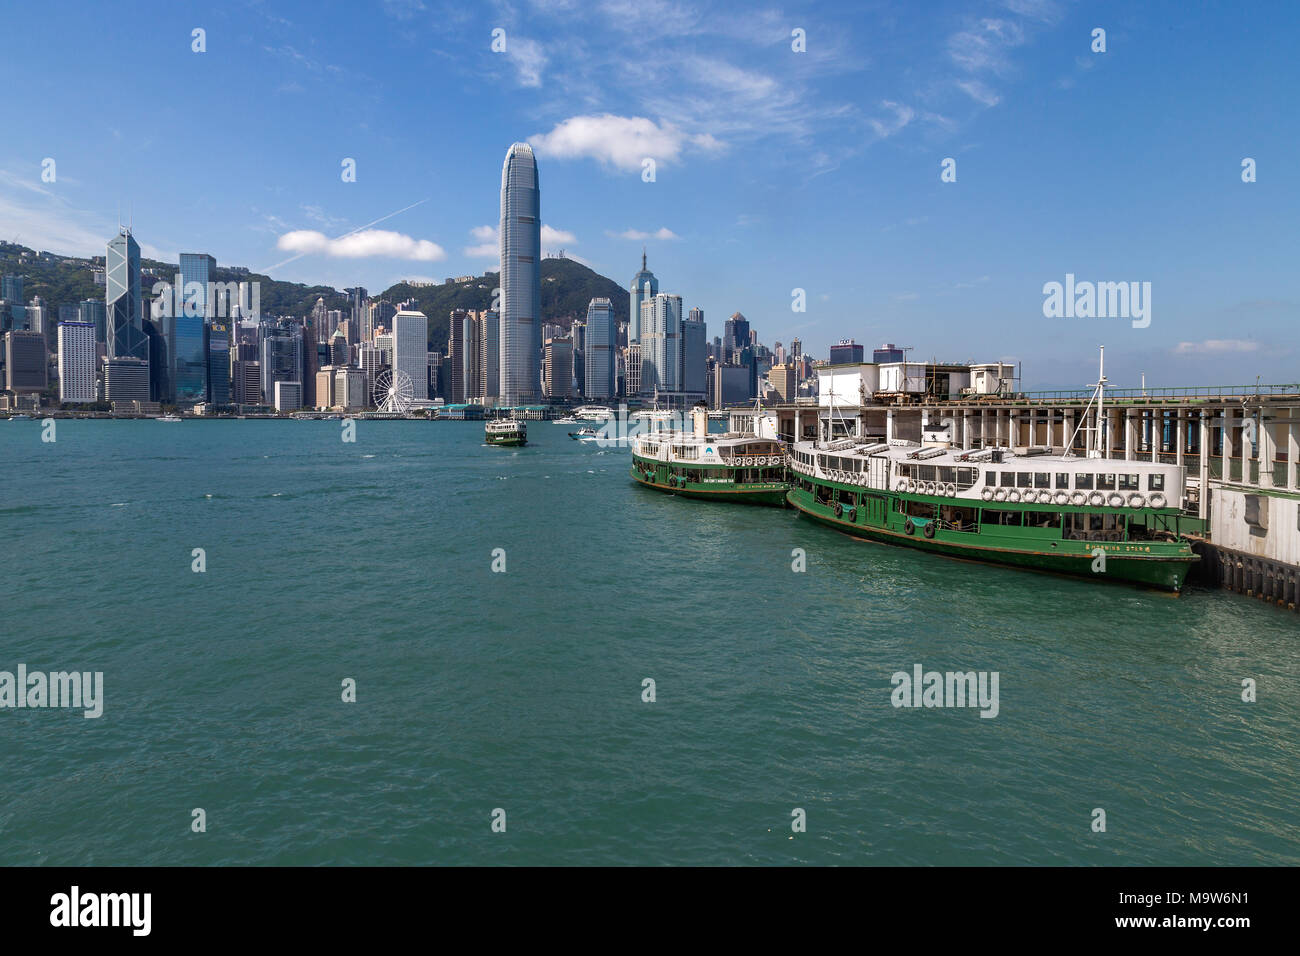 Star Ferry Pier, Victoria Harbour with the skyscrapers of Hong Kong Island in the background. Stock Photo